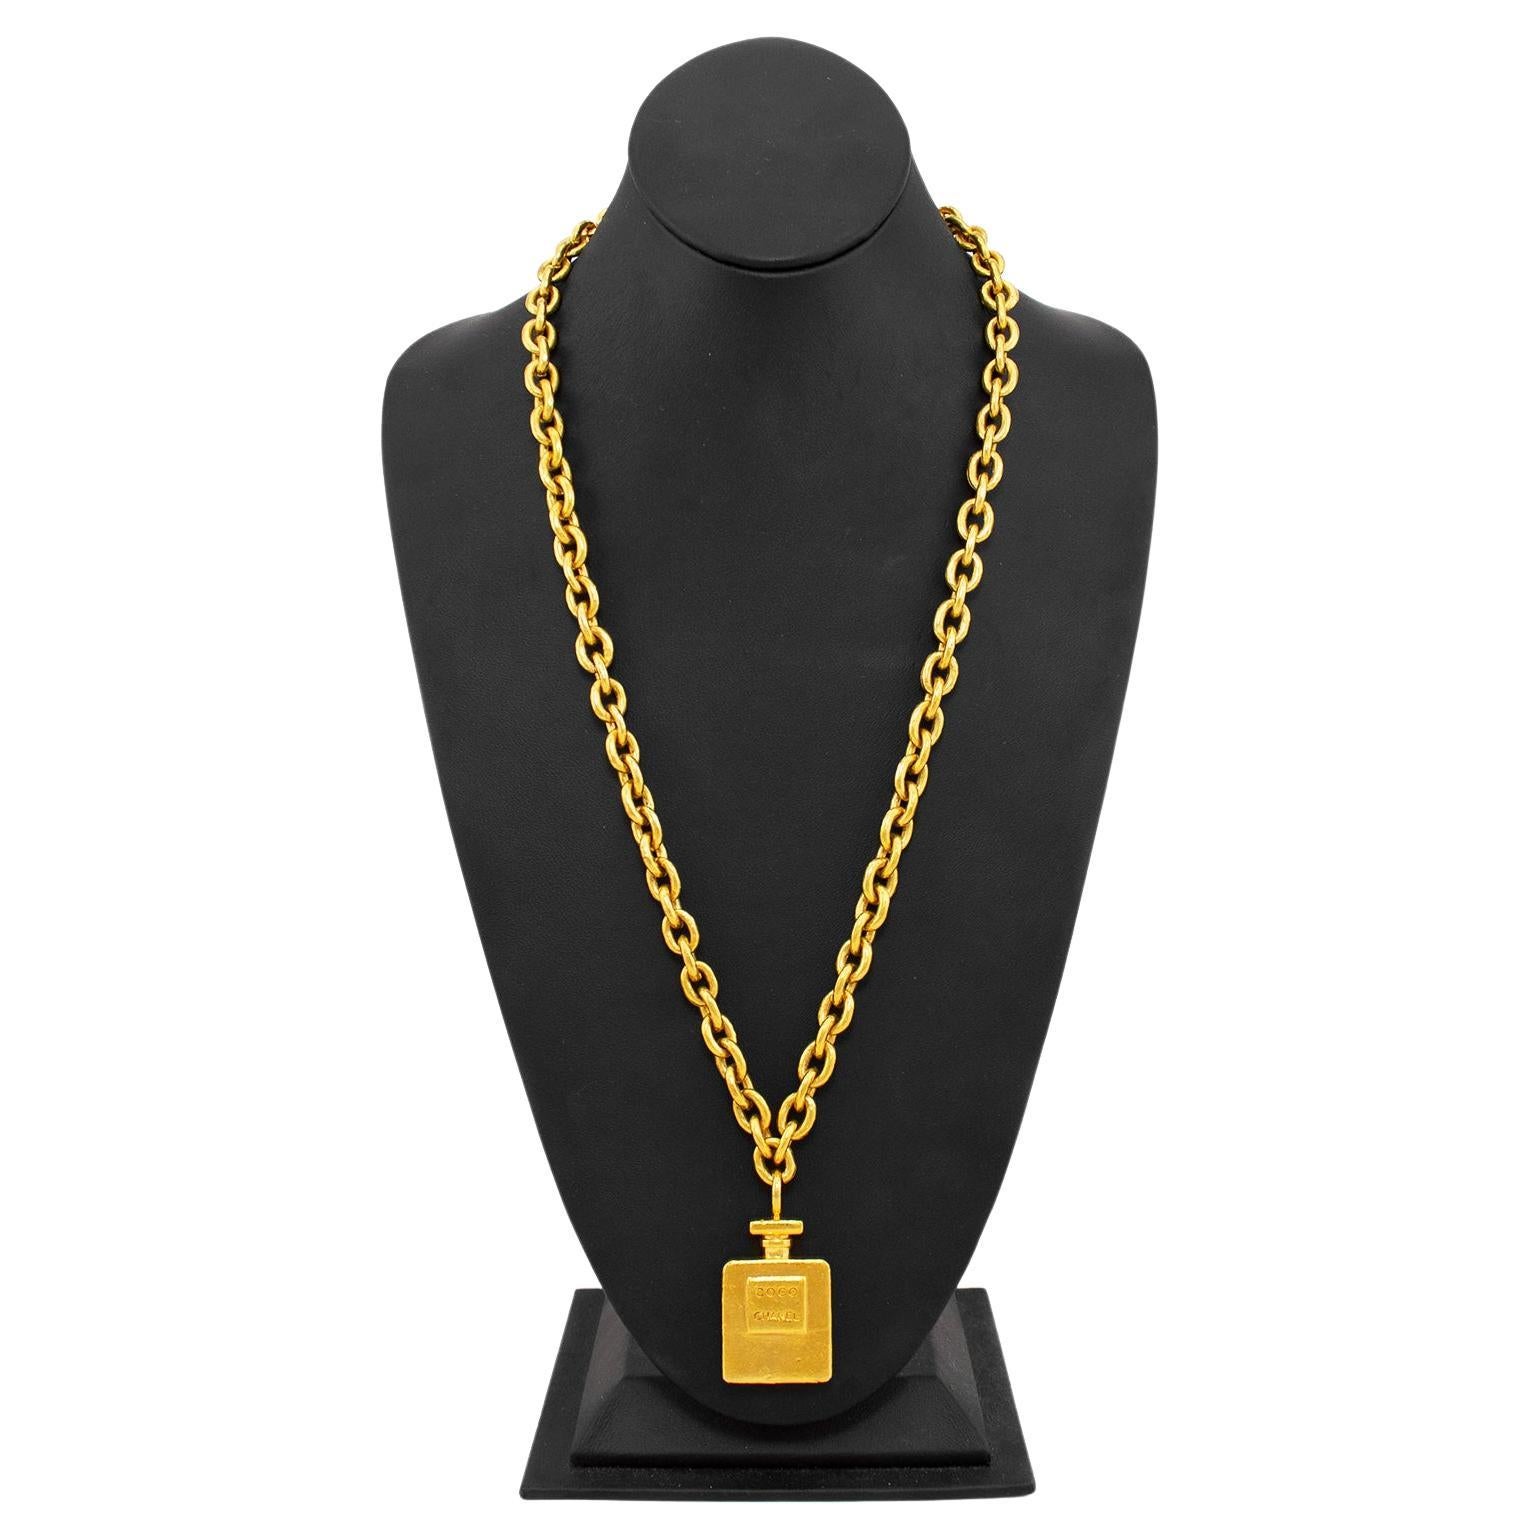 Gold Tone Chain Necklace - 1,150 For Sale on 1stDibs